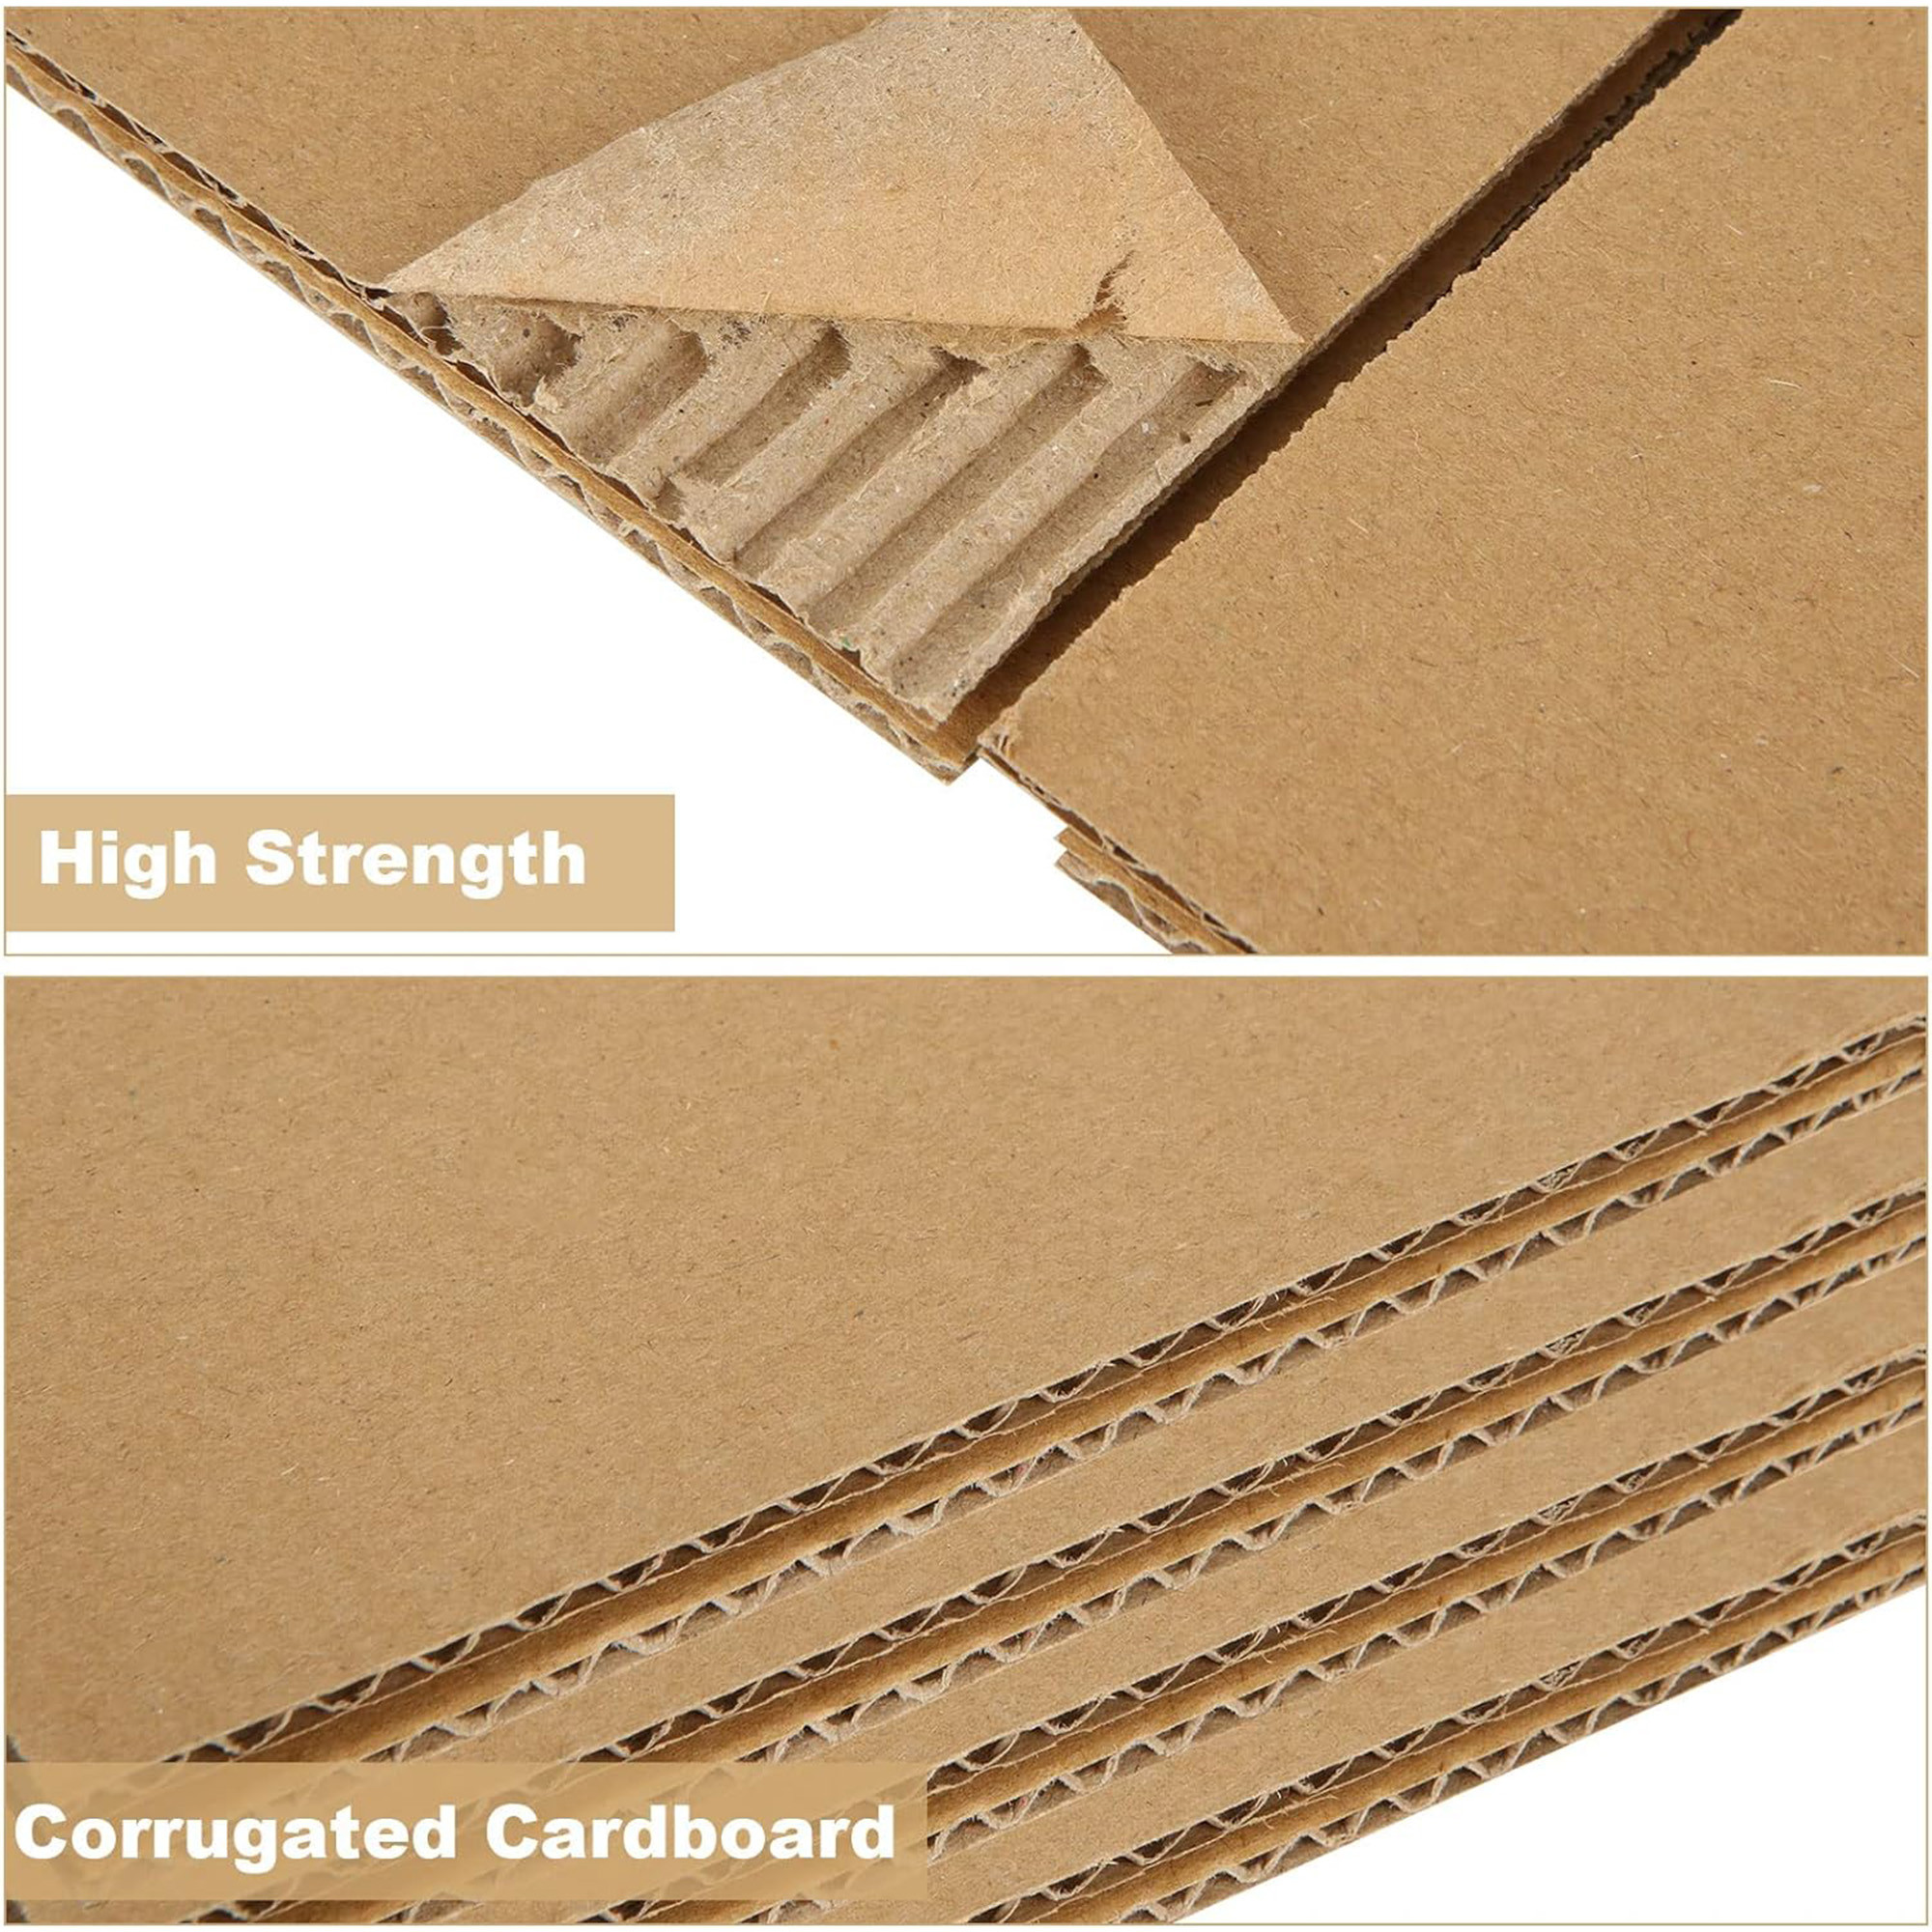 Kuber Industries Corrugated Box | 3 Ply Corrugated Packing Box | Corrugated for Shipping | Corrugated for Courier & Goods Transportation | L 10 x W 10 x H 11 Inch |Brown